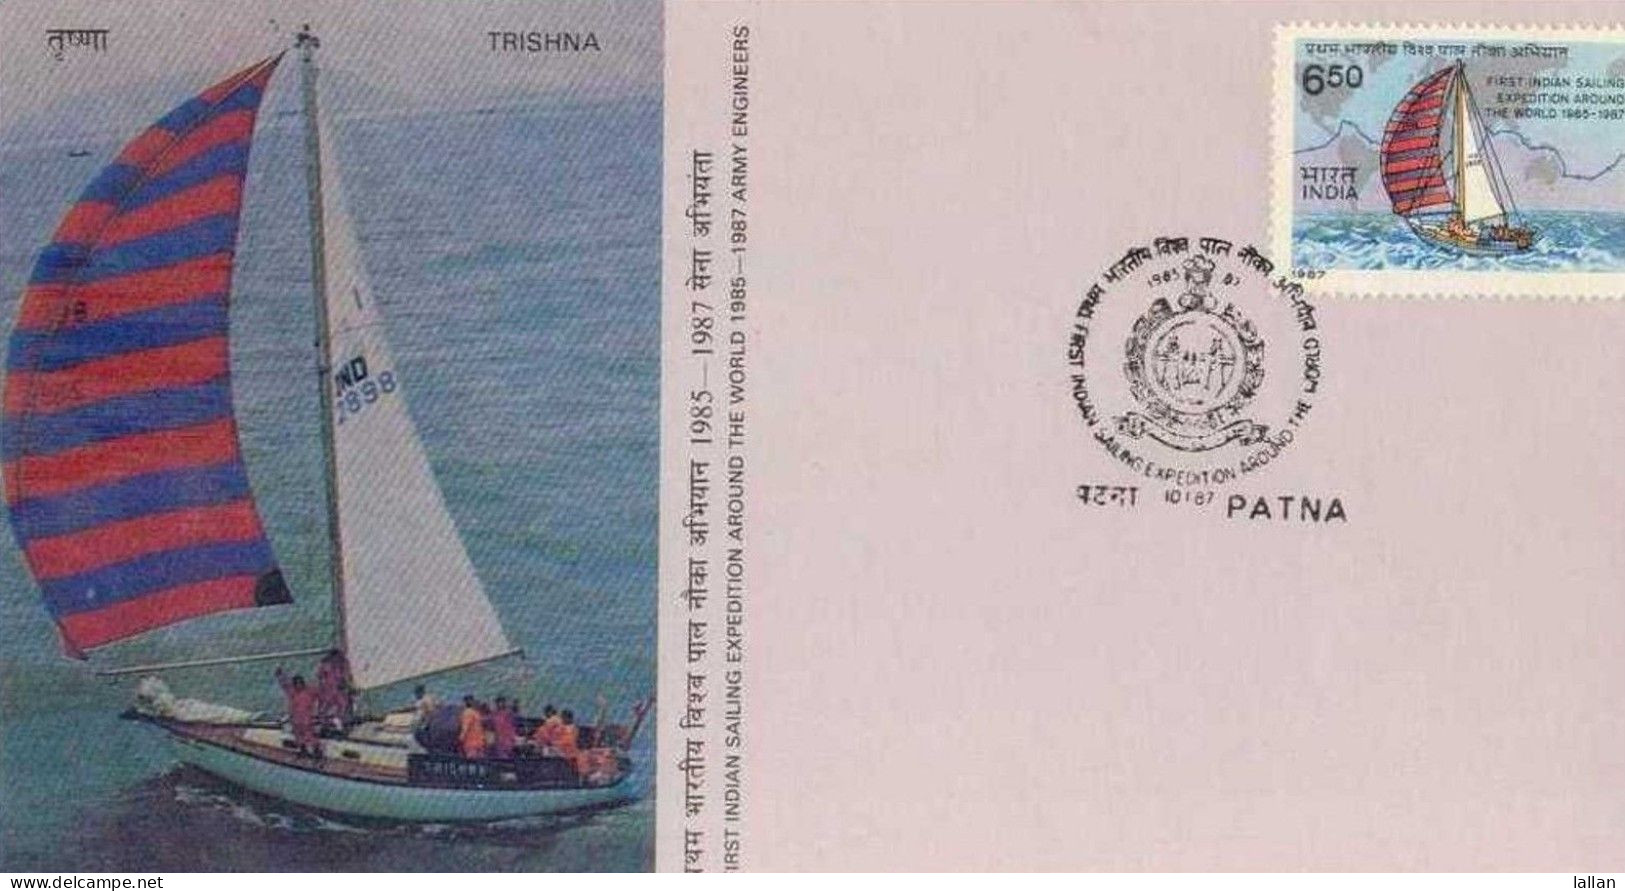 First Sailing Expedition Around The World, 1985-87, FDC, India, Condition As Per Scan LPS7 - Other (Sea)